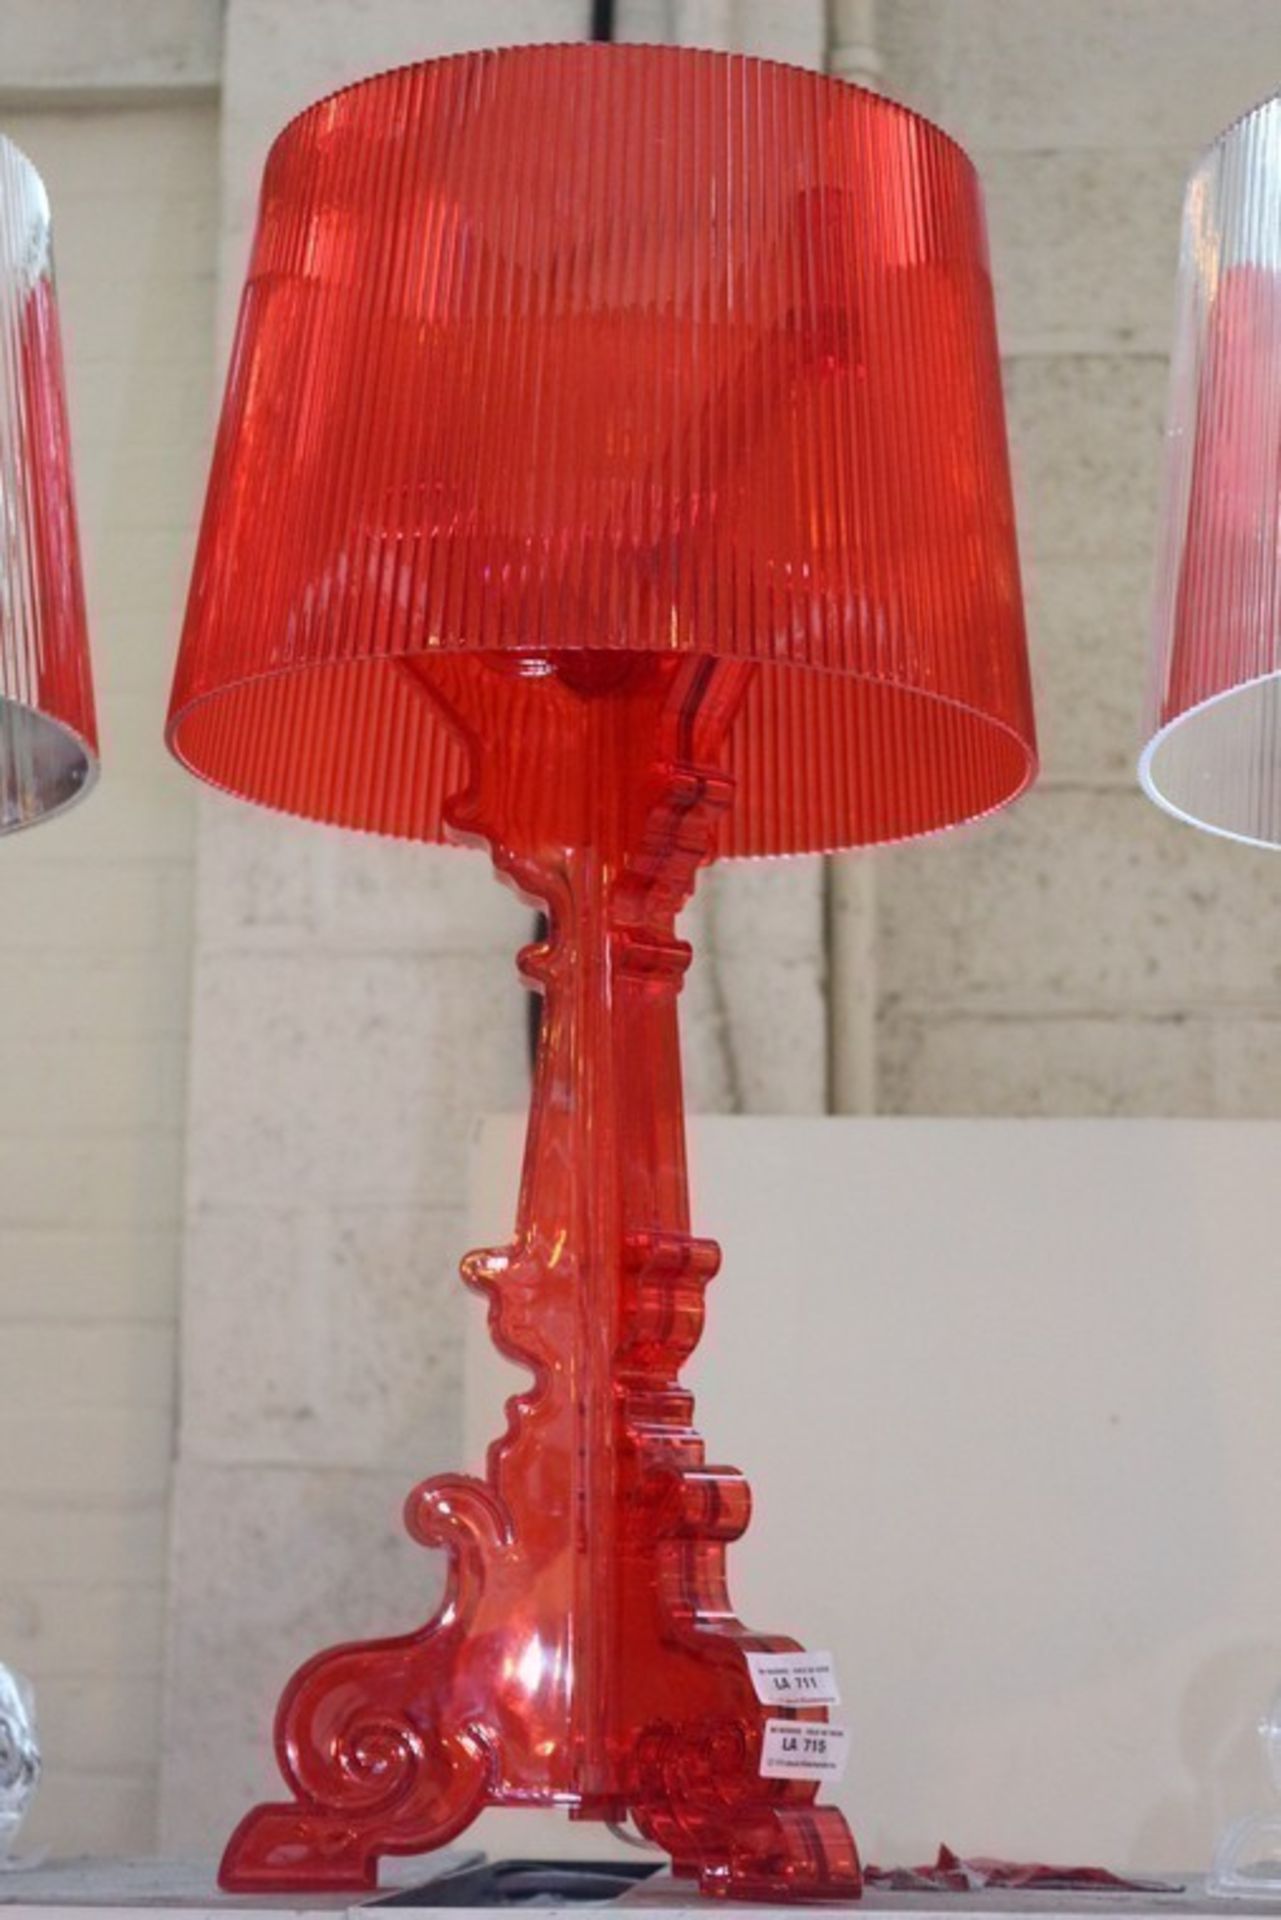 1 x BOURGIE STYLE RED DESIGNER TABLE LAMP (012-L) *PLEASE NOTE THAT THE BID PRICE IS MULTIPLIED BY